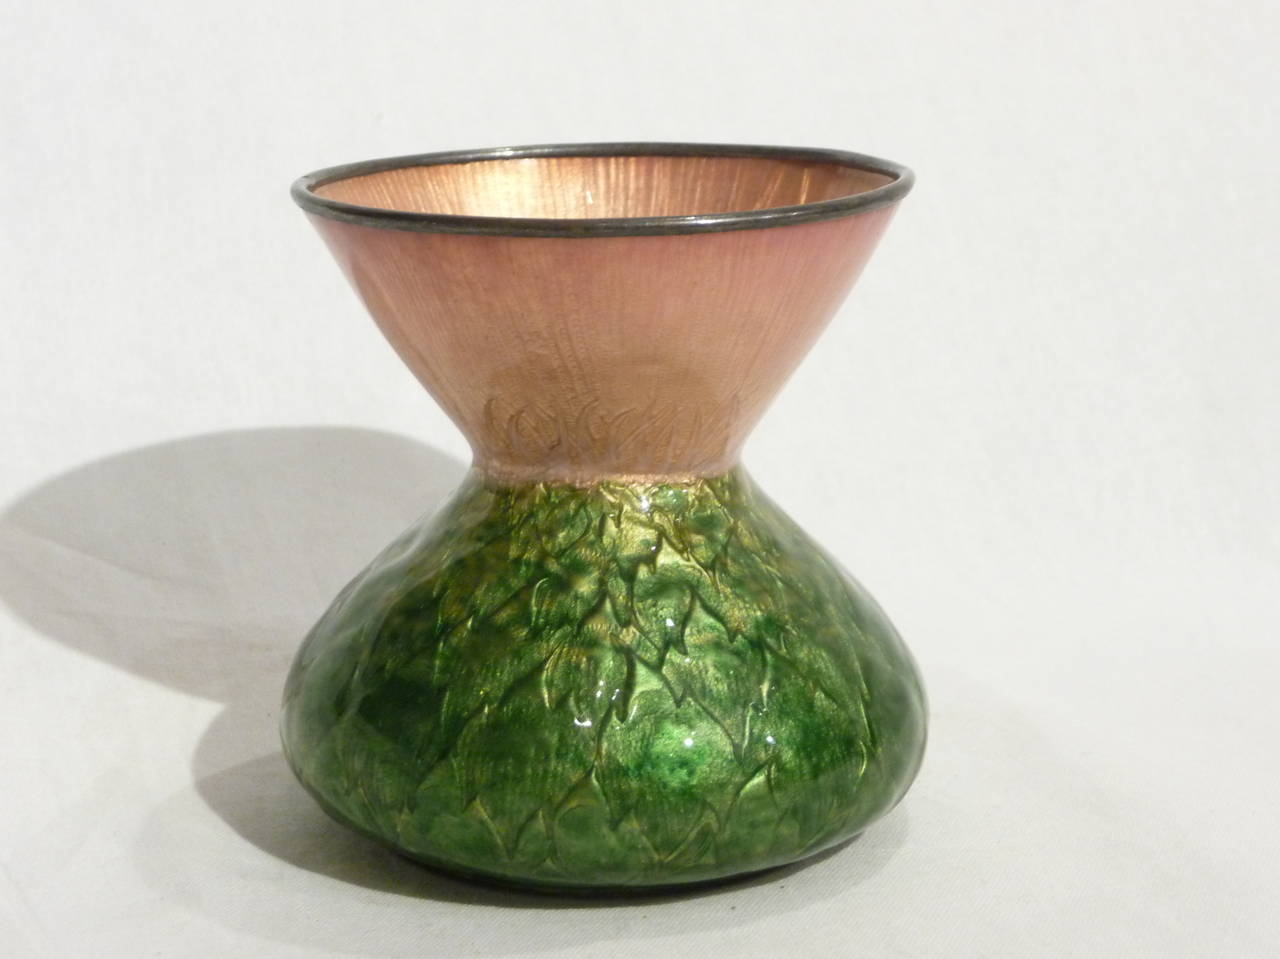 Copper and translucent enamel diabolo vase, the lower part is decorated with green enamel and gold artichoke leaves. The upper part is decorated with pink enamel. Signed. 

Identical model at the Kunstgewerbe Museum in Berlin, acquired at the